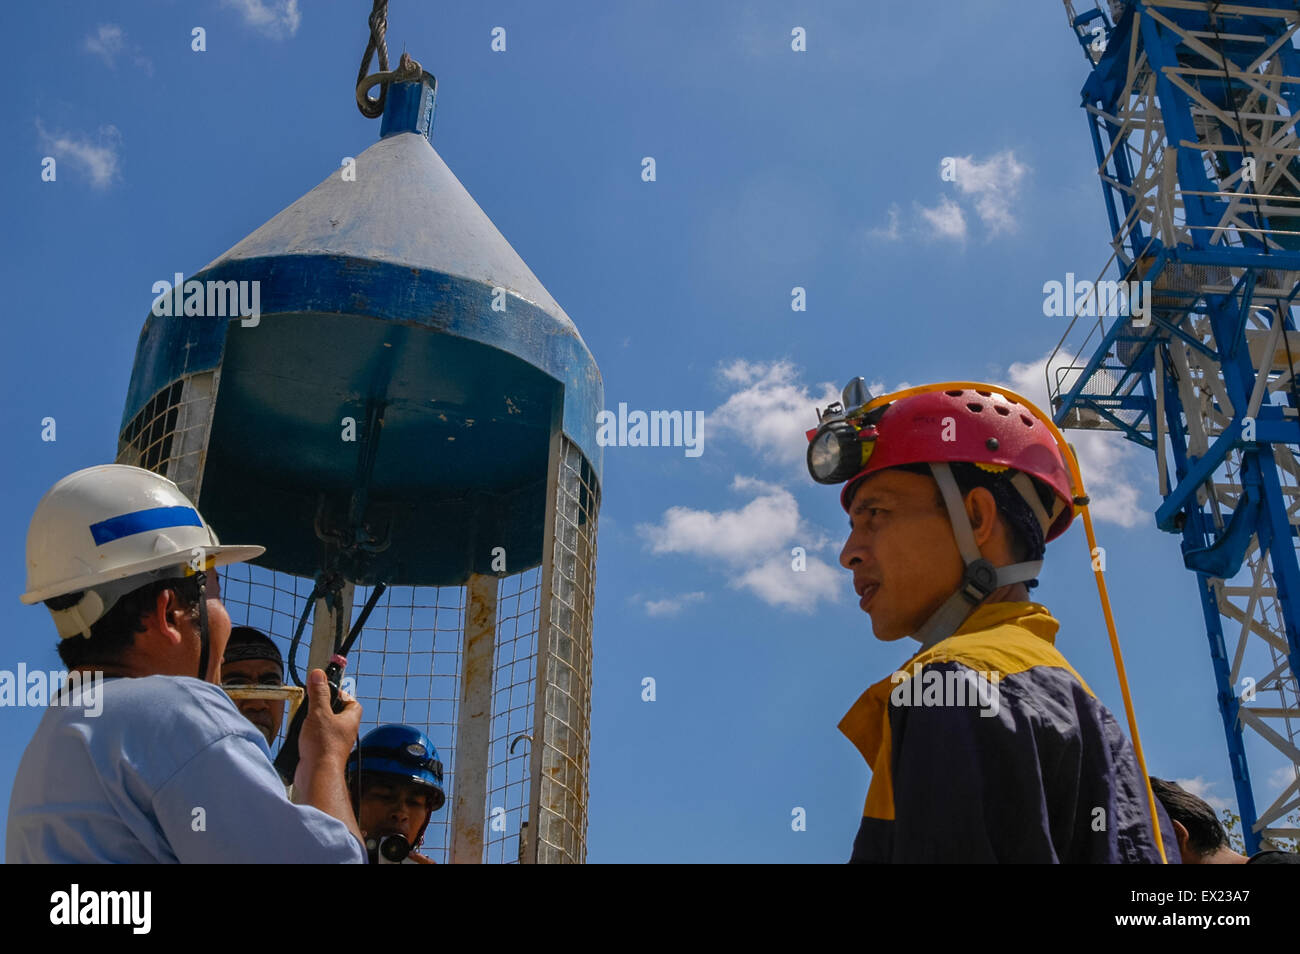 Speleology enthusiasts and a journalist boarding a vertical construction lift for an excursion to the Bribin underground water project in Indonesia. Stock Photo